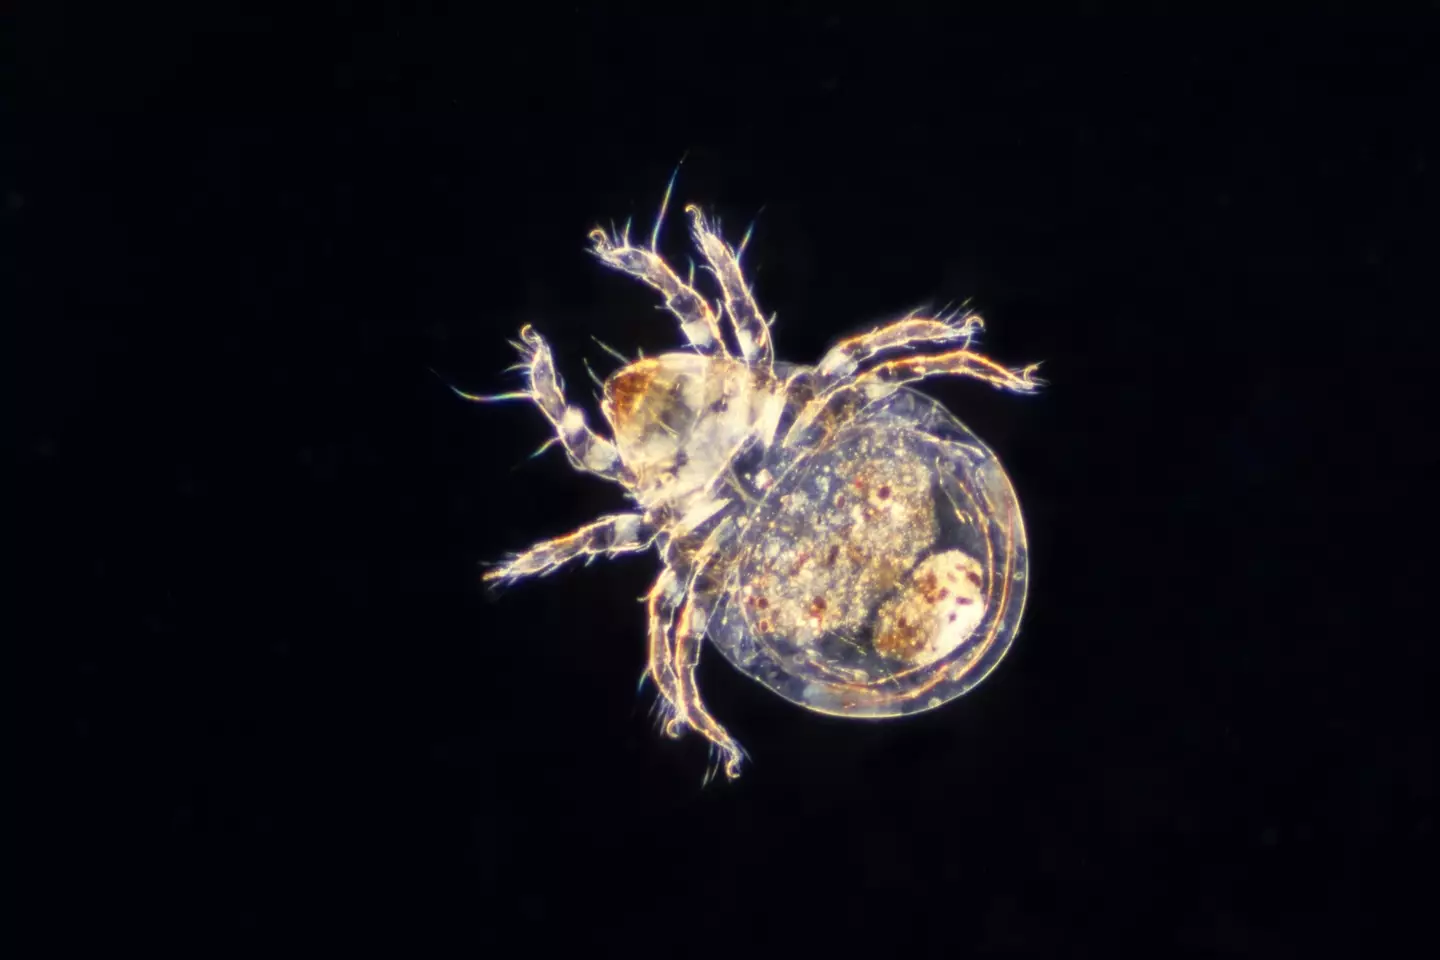 A dust mite.